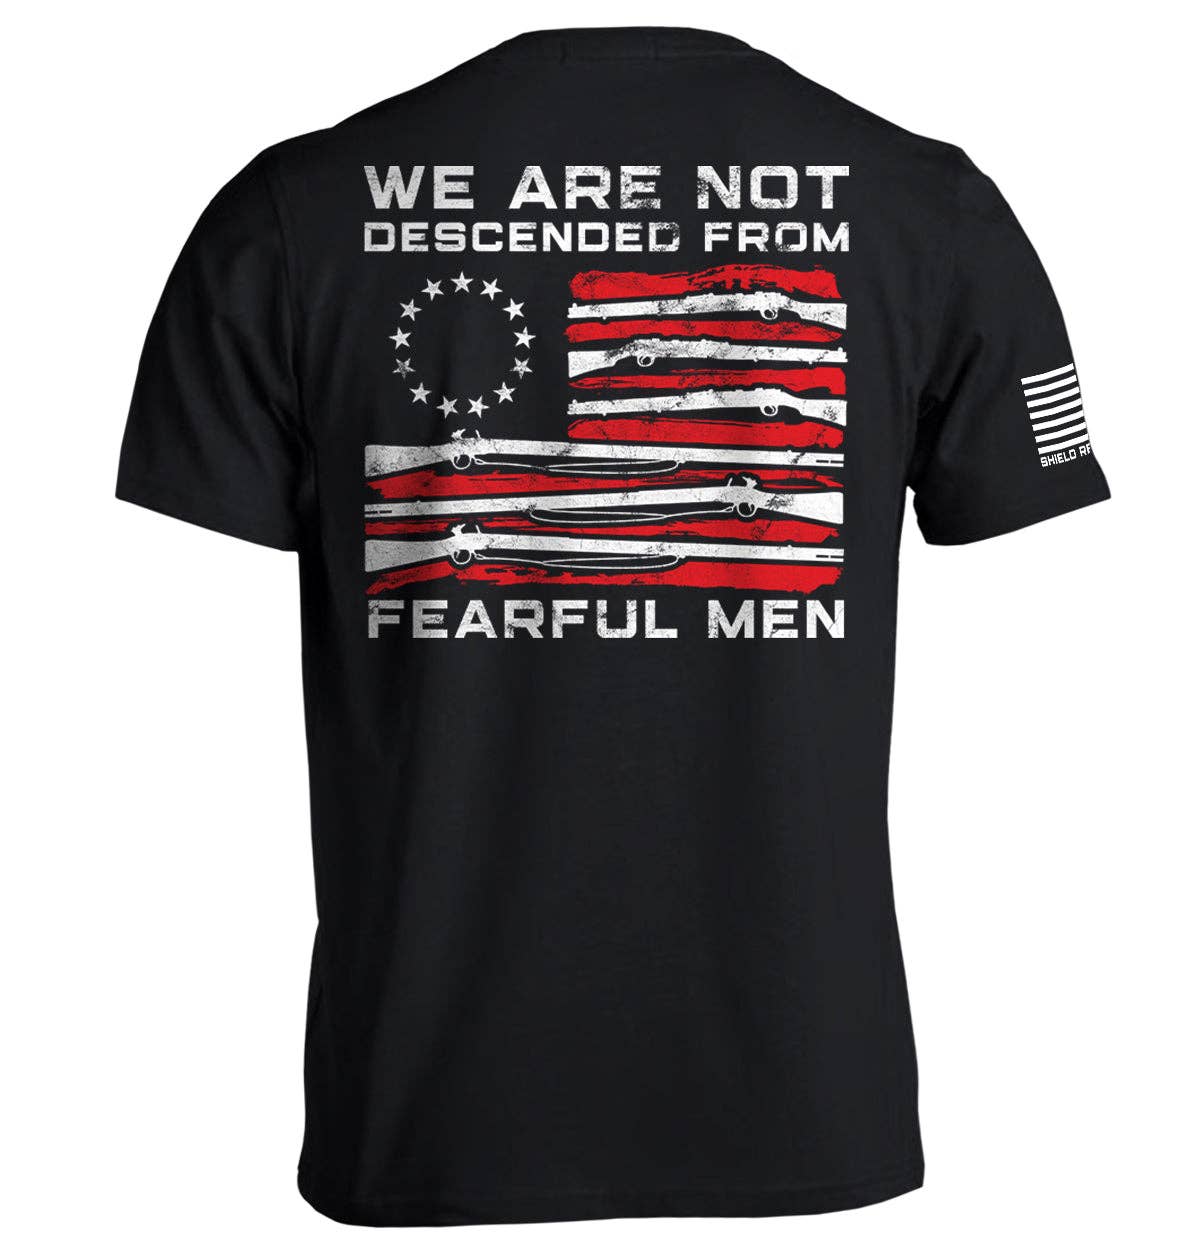 We Are Not Descended From Fearful Men tshirt